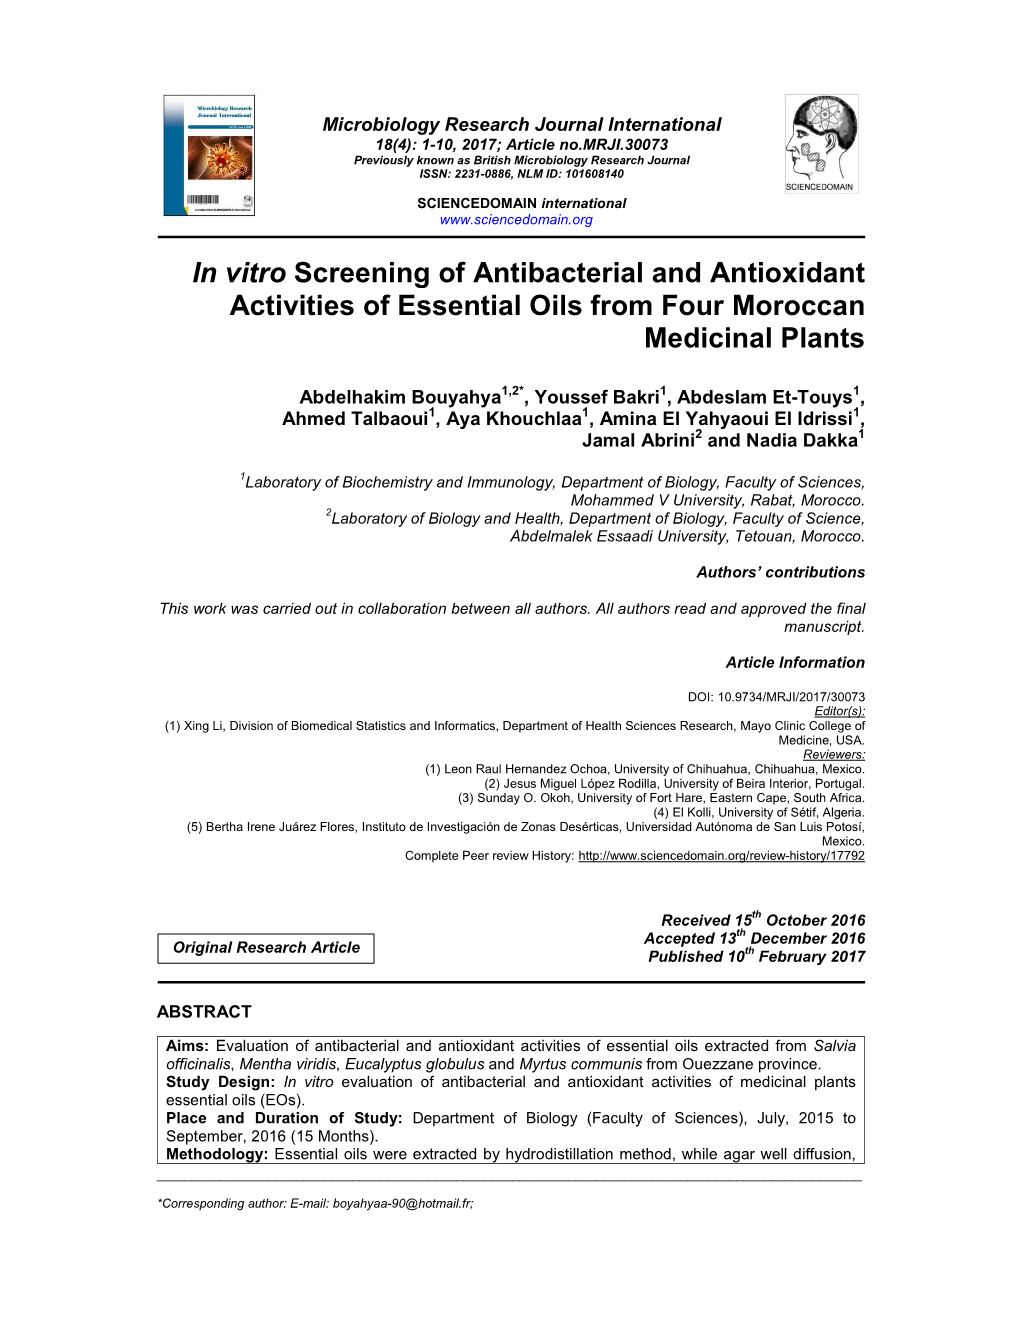 In Vitro Screening of Antibacterial and Antioxidant Activities of Essential Oils from Four Moroccan Medicinal Plants